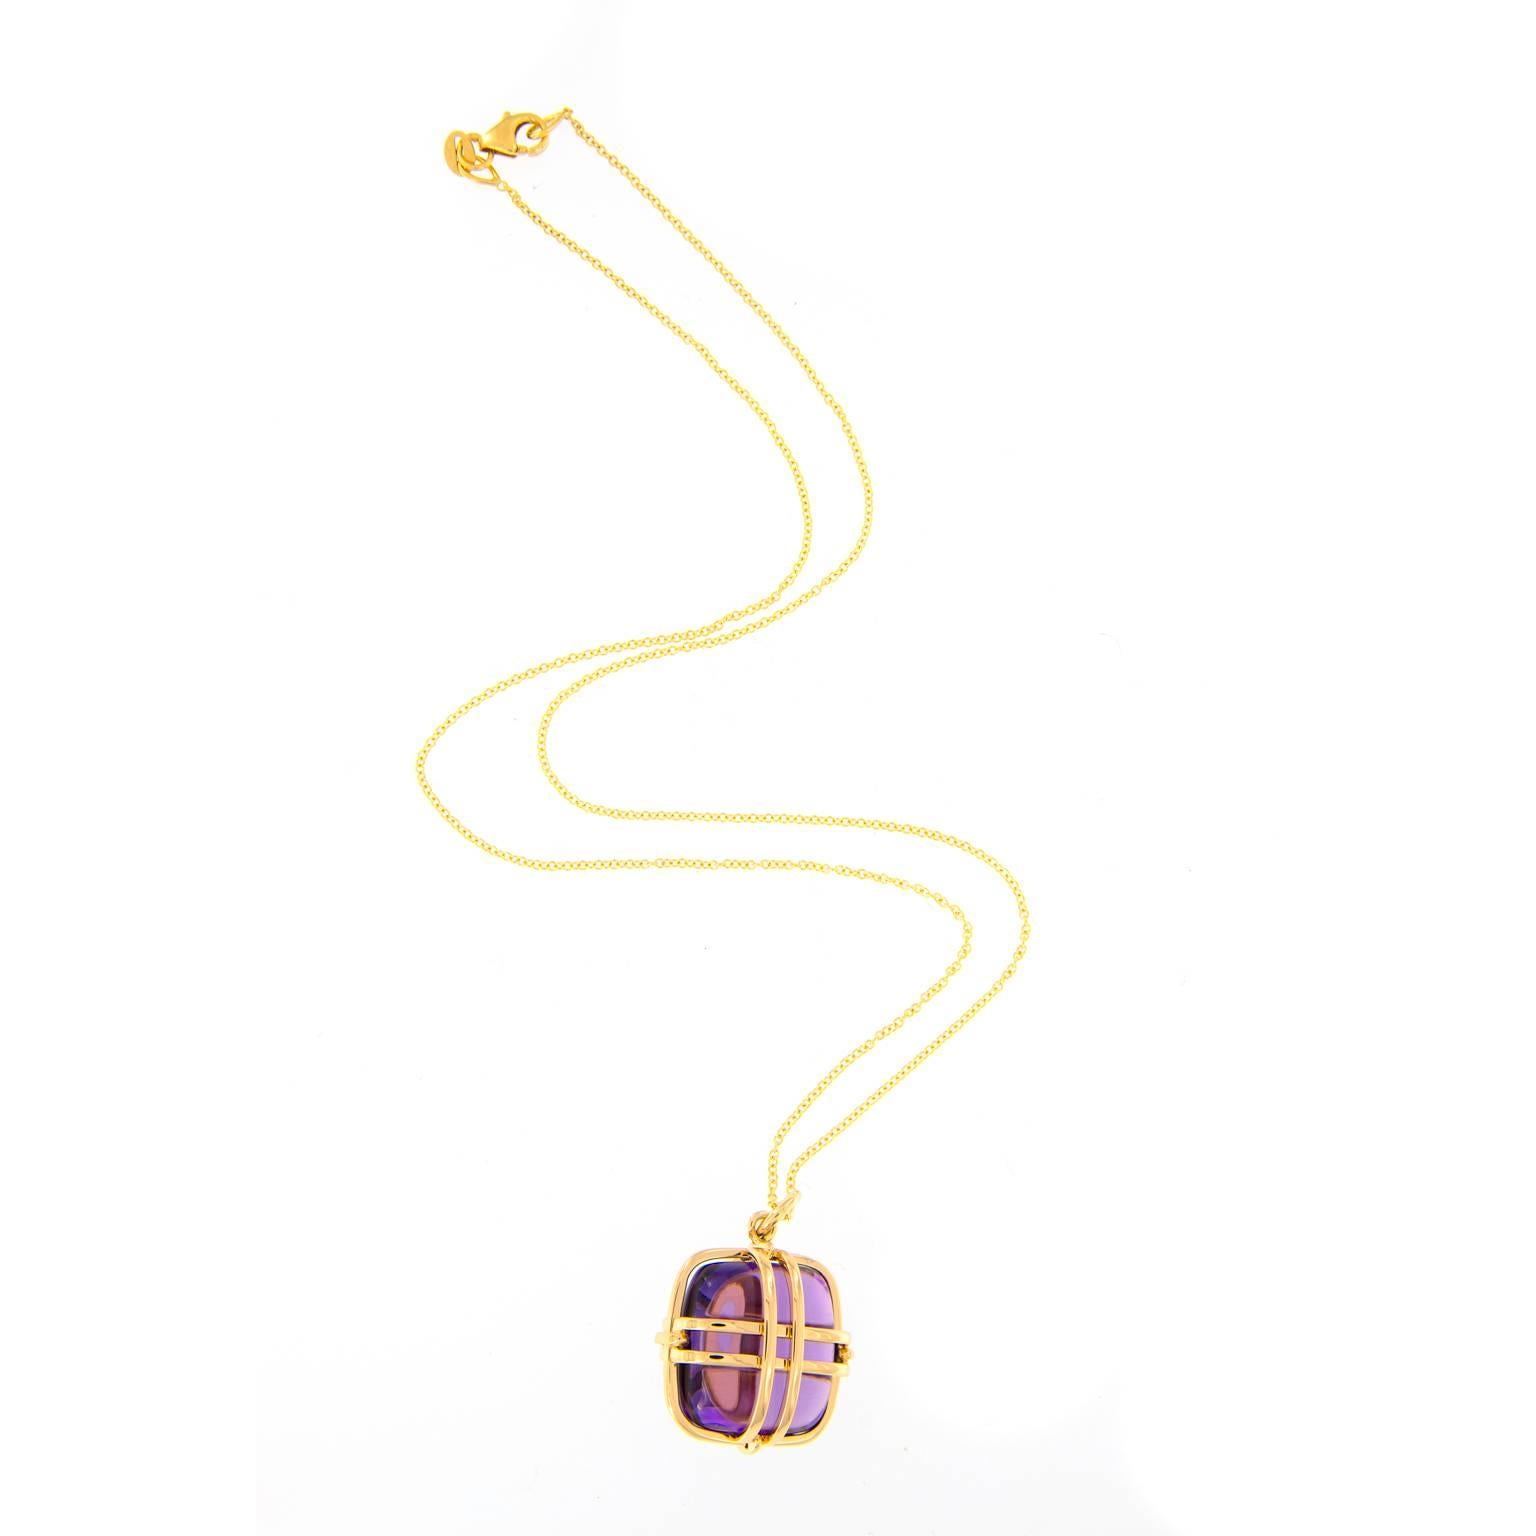 Beautiful amethyst in a fun cube shape surrounded by an intricate cage pattern of 18k yellow gold. Pendant drops from an 18 inch chain. From the Freedom Collection designed by Goshwara. Weighs 9.0 grams. Pendant is 14.33 mm x 14.33 mm.

Amethyst